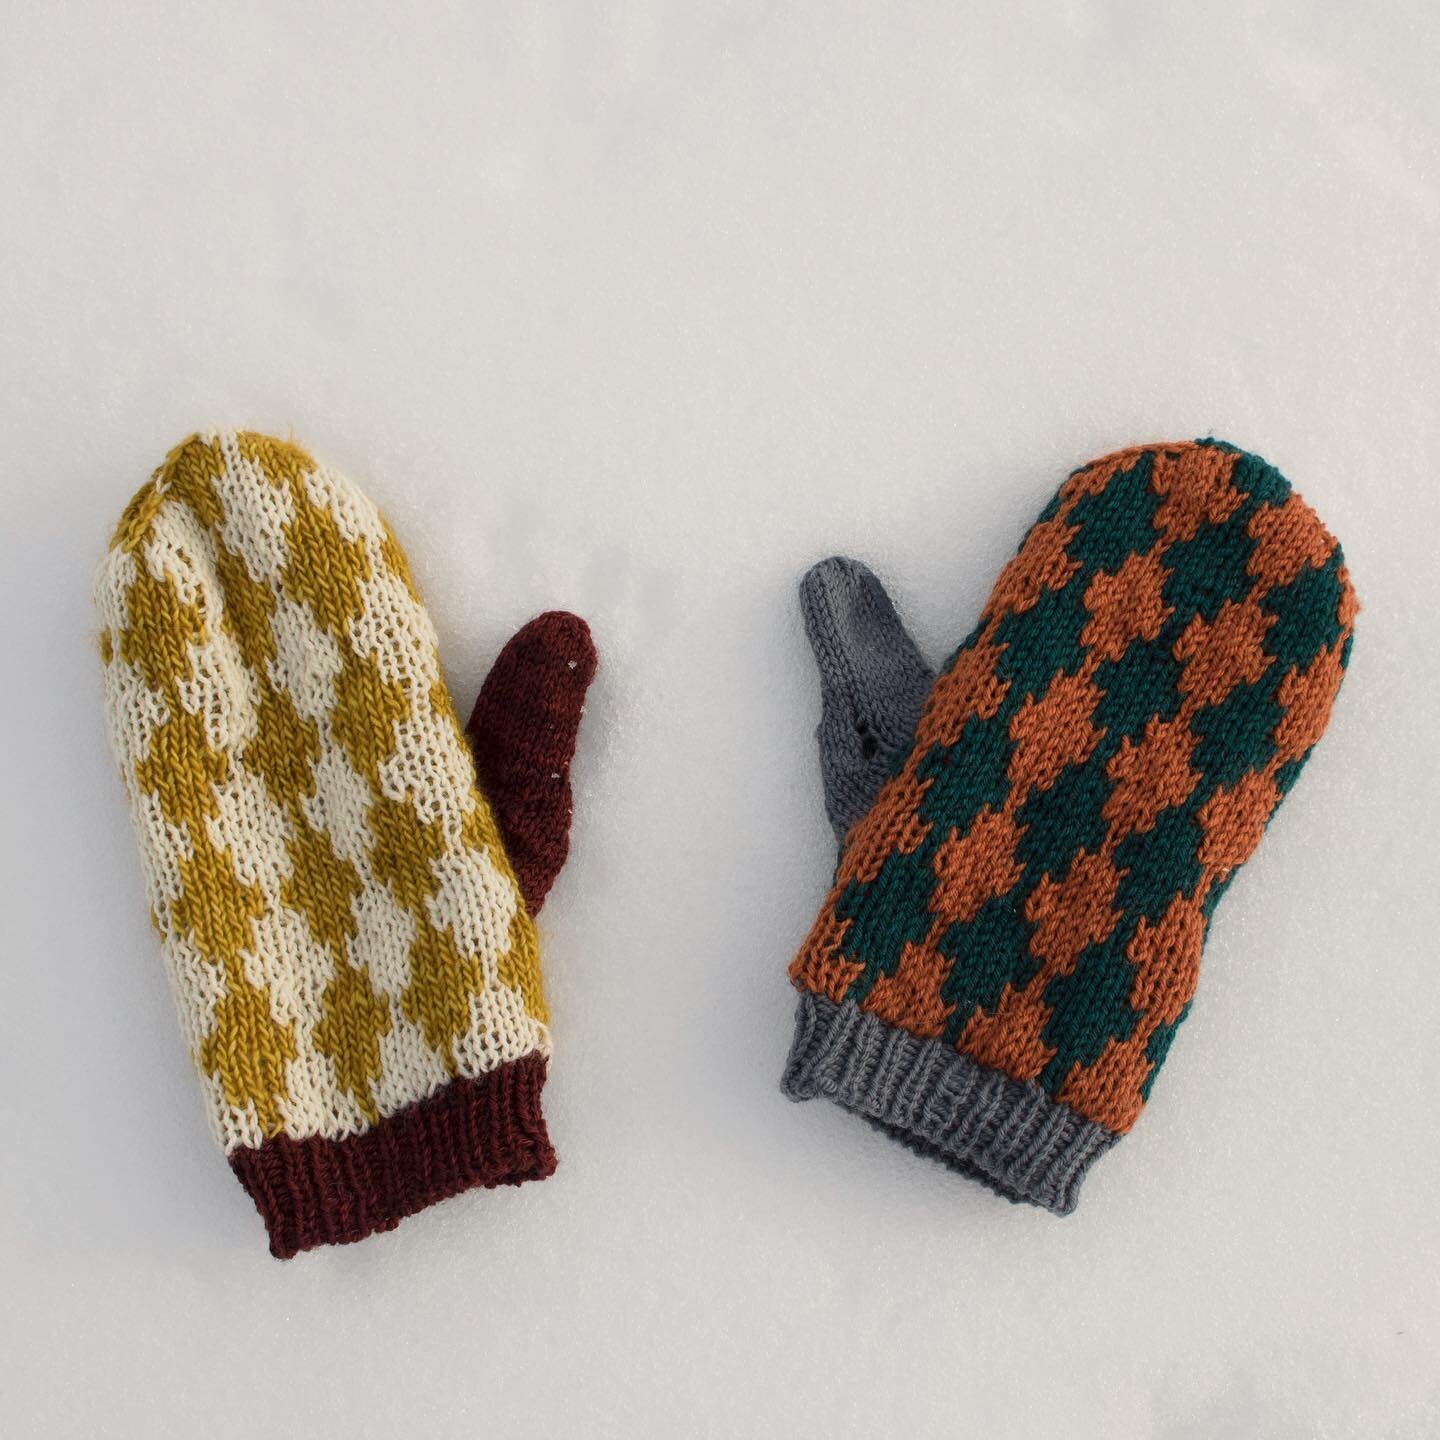 Knit these mittens in a hurry this weekend with yarn left over from some other projects &mdash; $45 and I might make some in other colors!